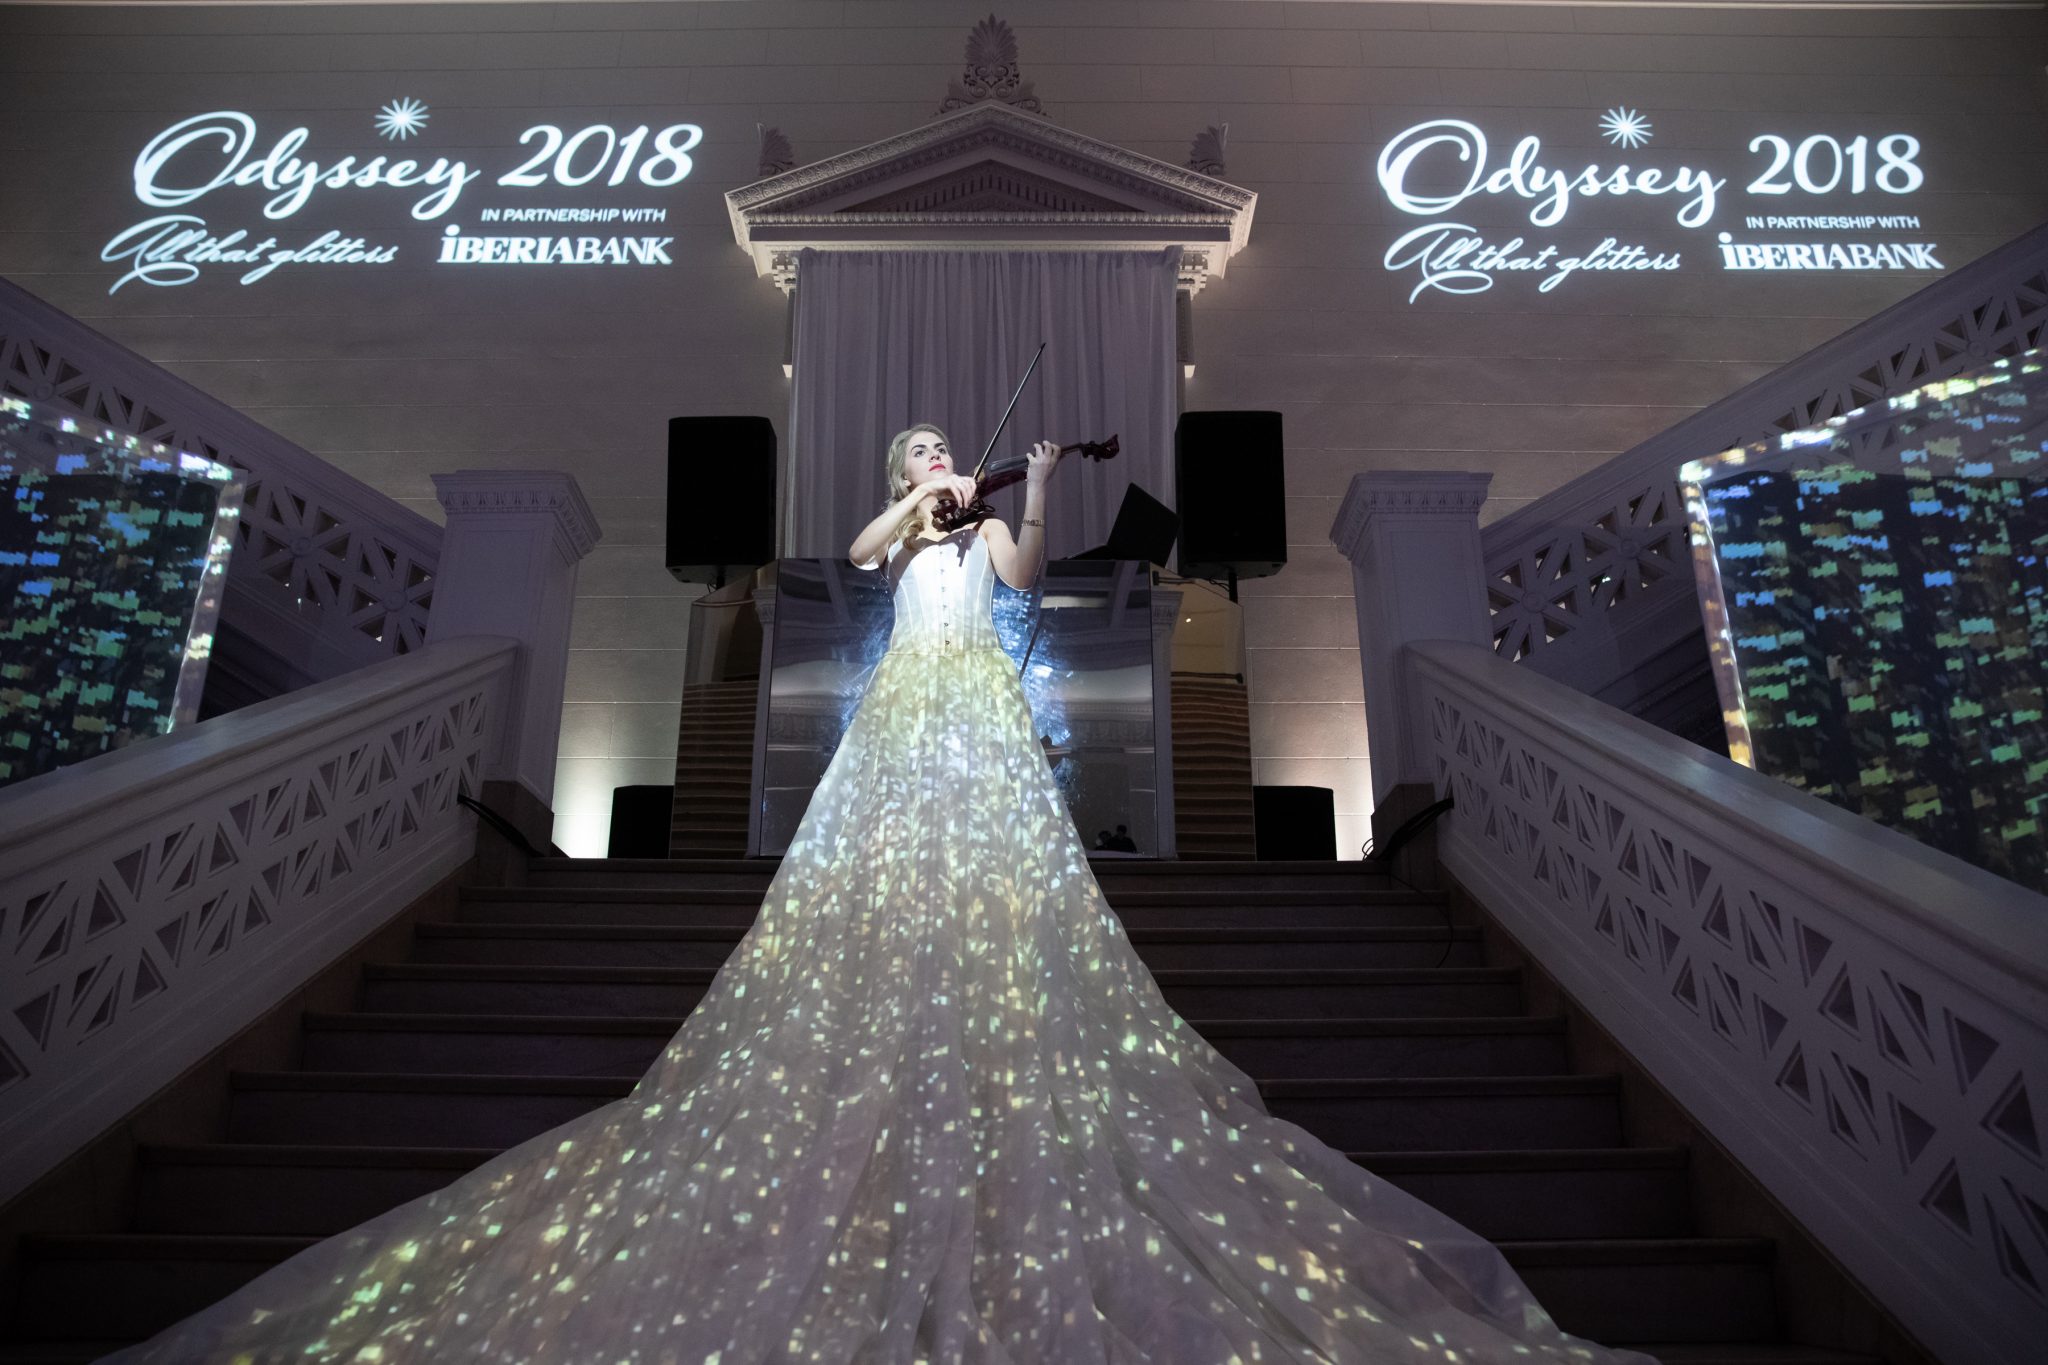 Buy tickets and sponsorships now for 2019 Odyssey Ball fundraiser - New ...